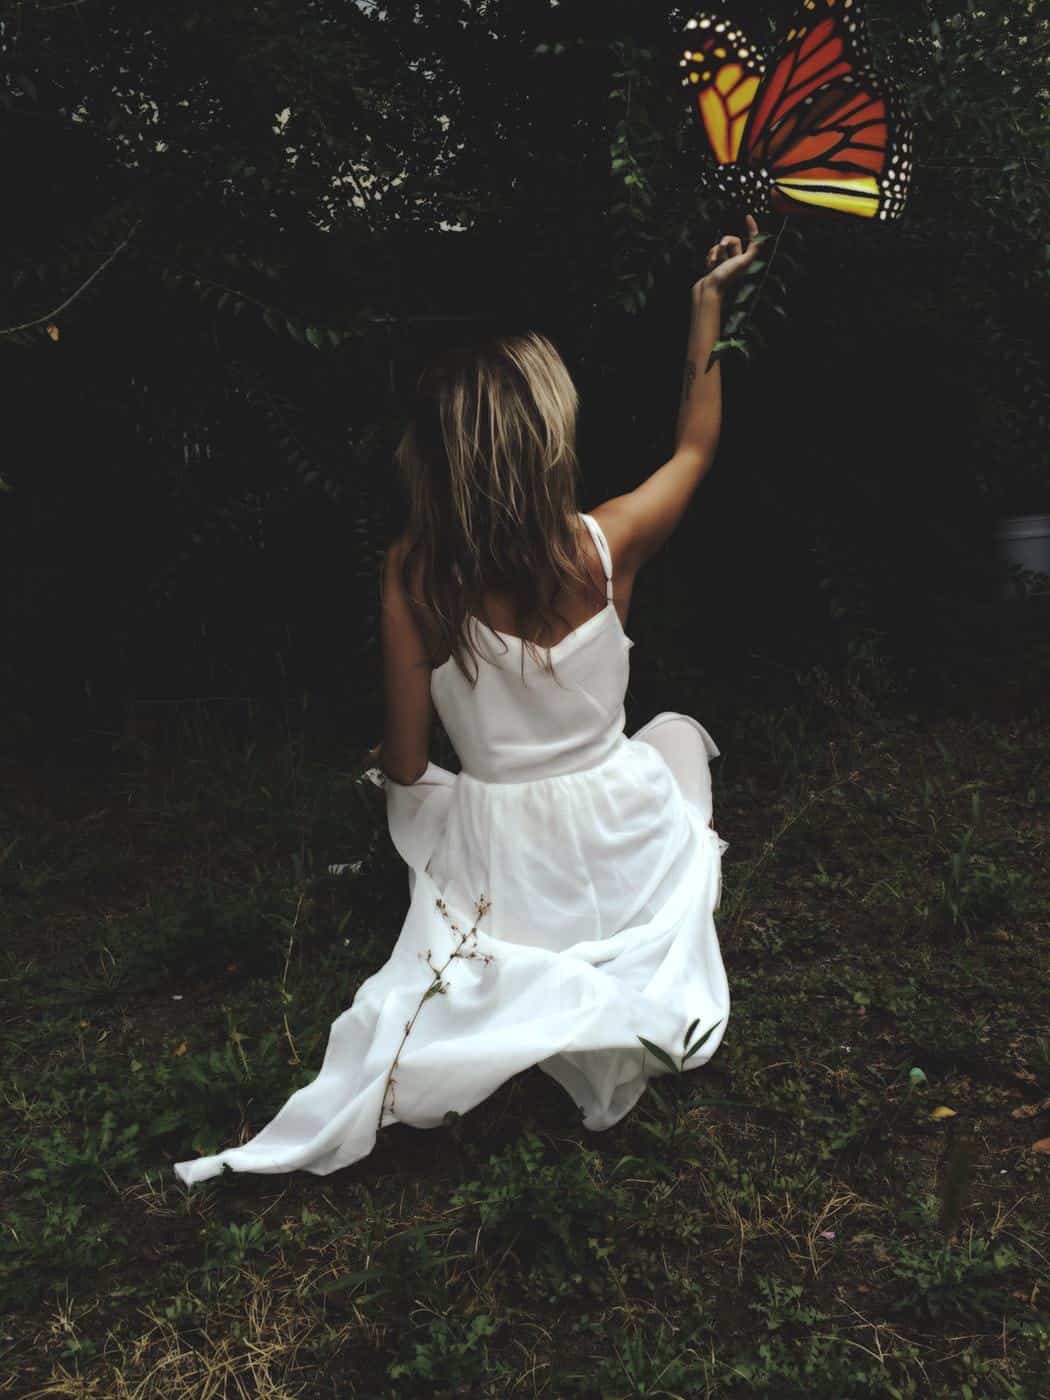 Woman in white dress kneeling in grassy garden stretching her arm to touch a large fantasy butterly